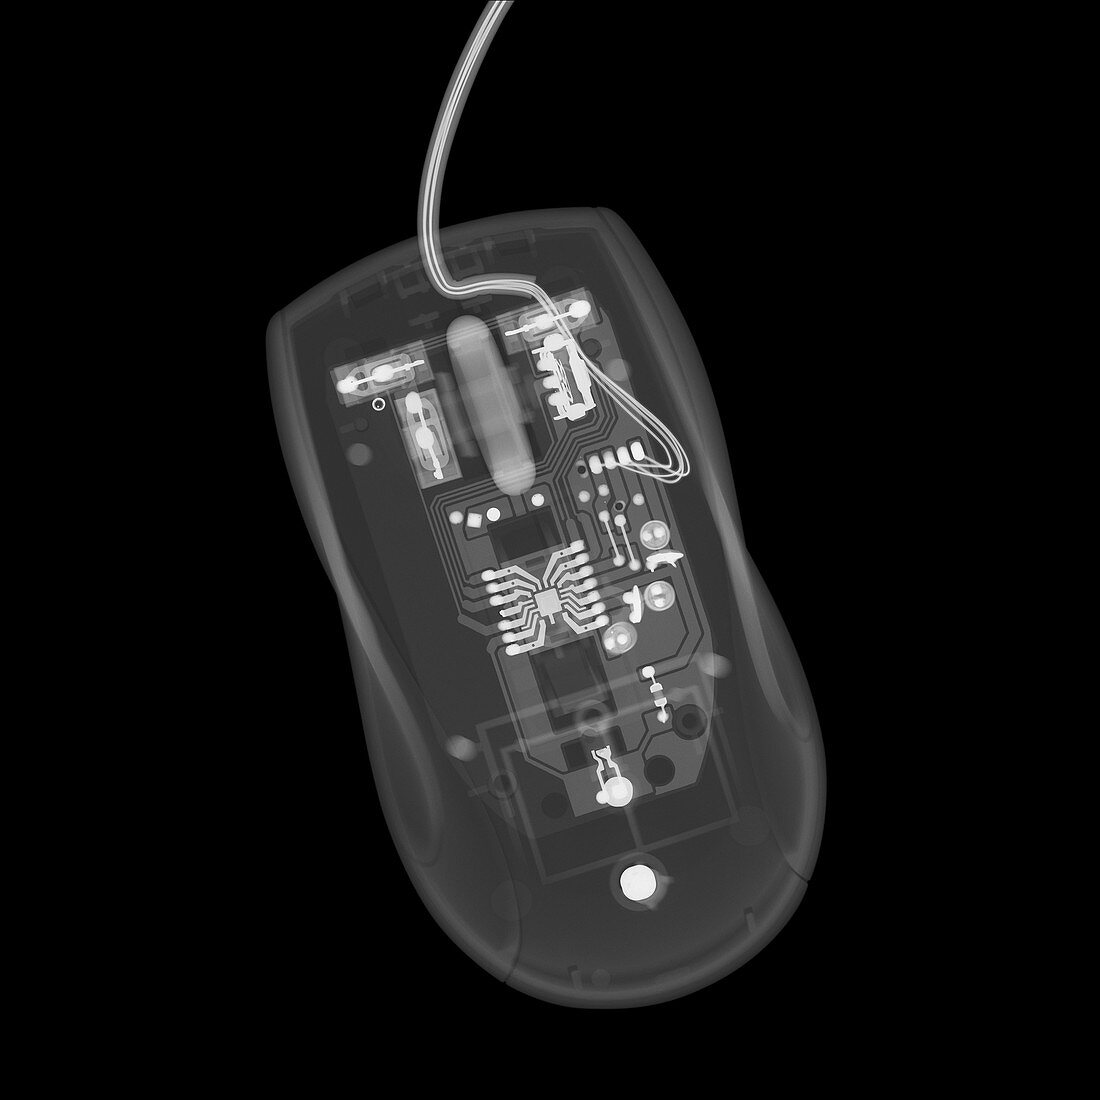 Computer mouse, X-ray